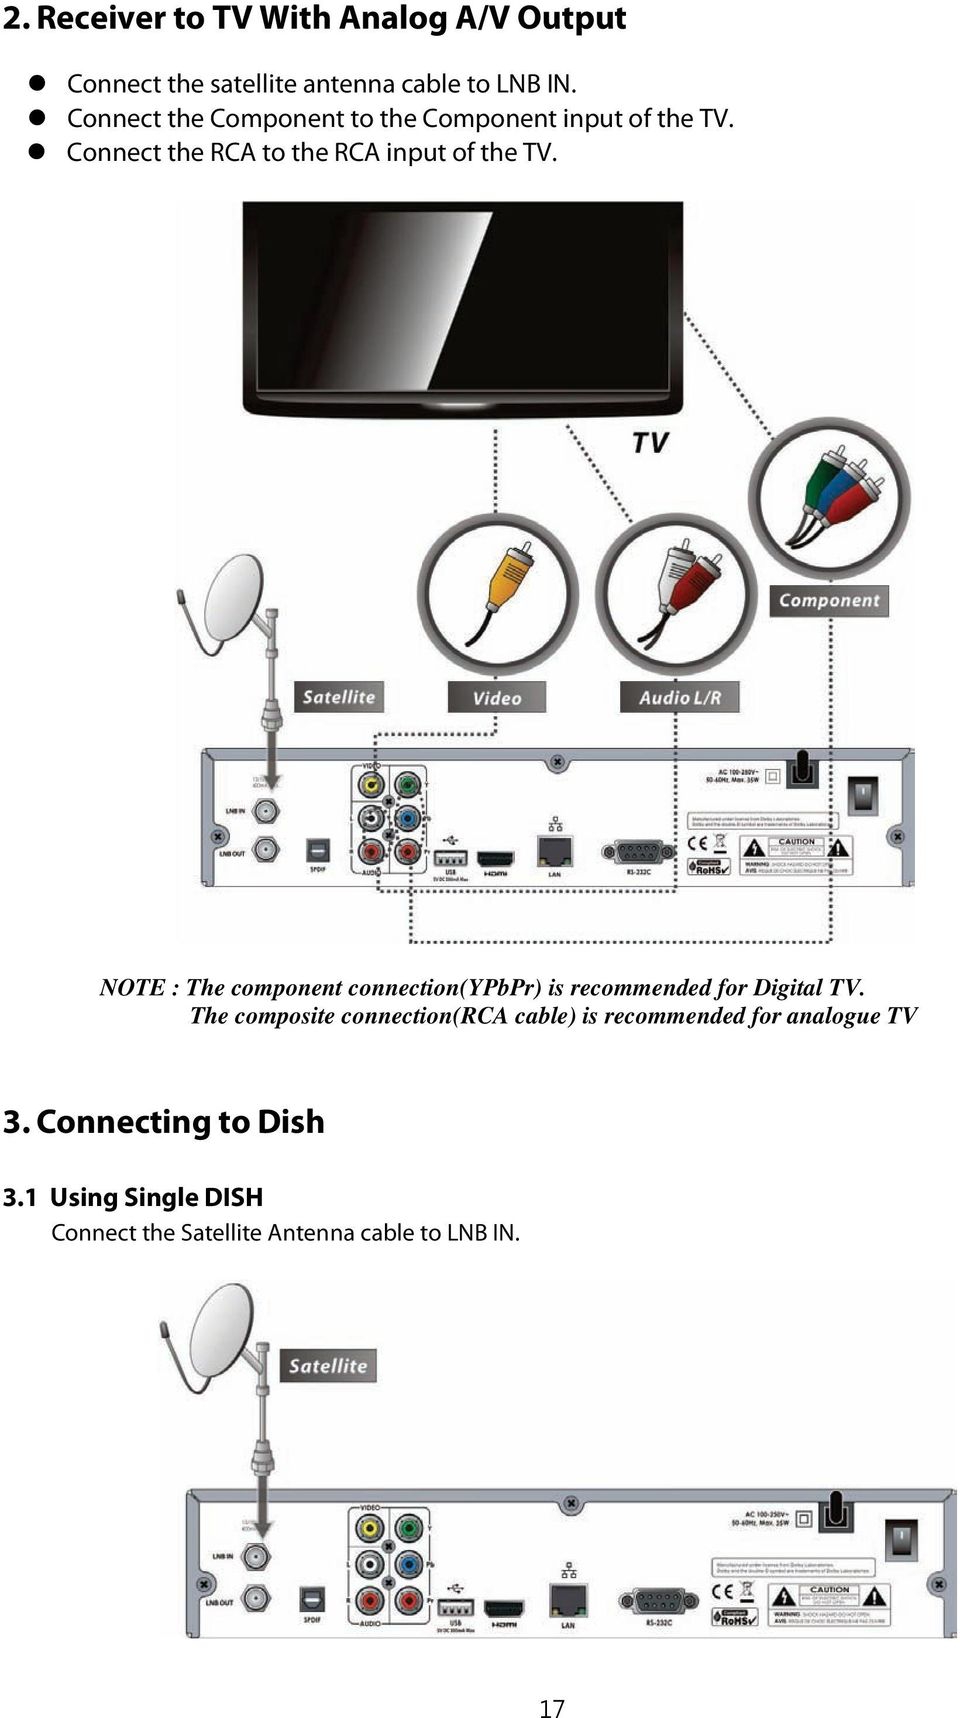 NOTE : The component connection(ypbpr) is recommended for Digital TV.